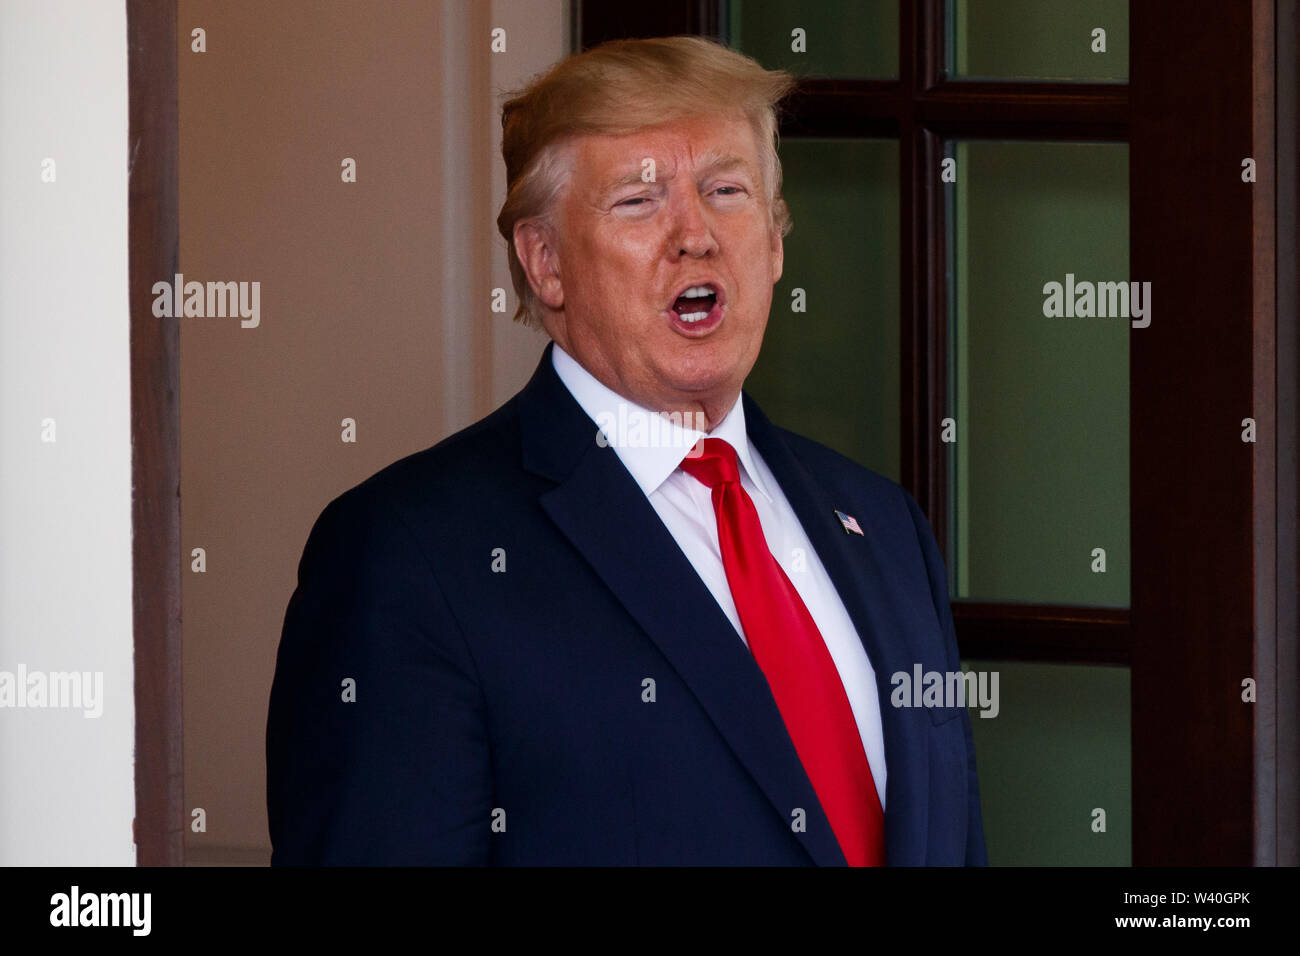 Washington, USA. 18th July, 2019. U.S. President Donald Trump speaks to the media at the White House in Washington, DC, the United States, on July 18, 2019. Donald Trump announced on Thursday that a U.S. warship destroyed an Iranian drone in the Strait of Hormuz. Speaking at the White House, Trump said that USS Boxer, an amphibious assault ship of the U.S. Navy, destroyed the drone that threatened the U.S. warship by flying within 1,000 yards of it. Credit: Ting Shen/Xinhua/Alamy Live News Stock Photo